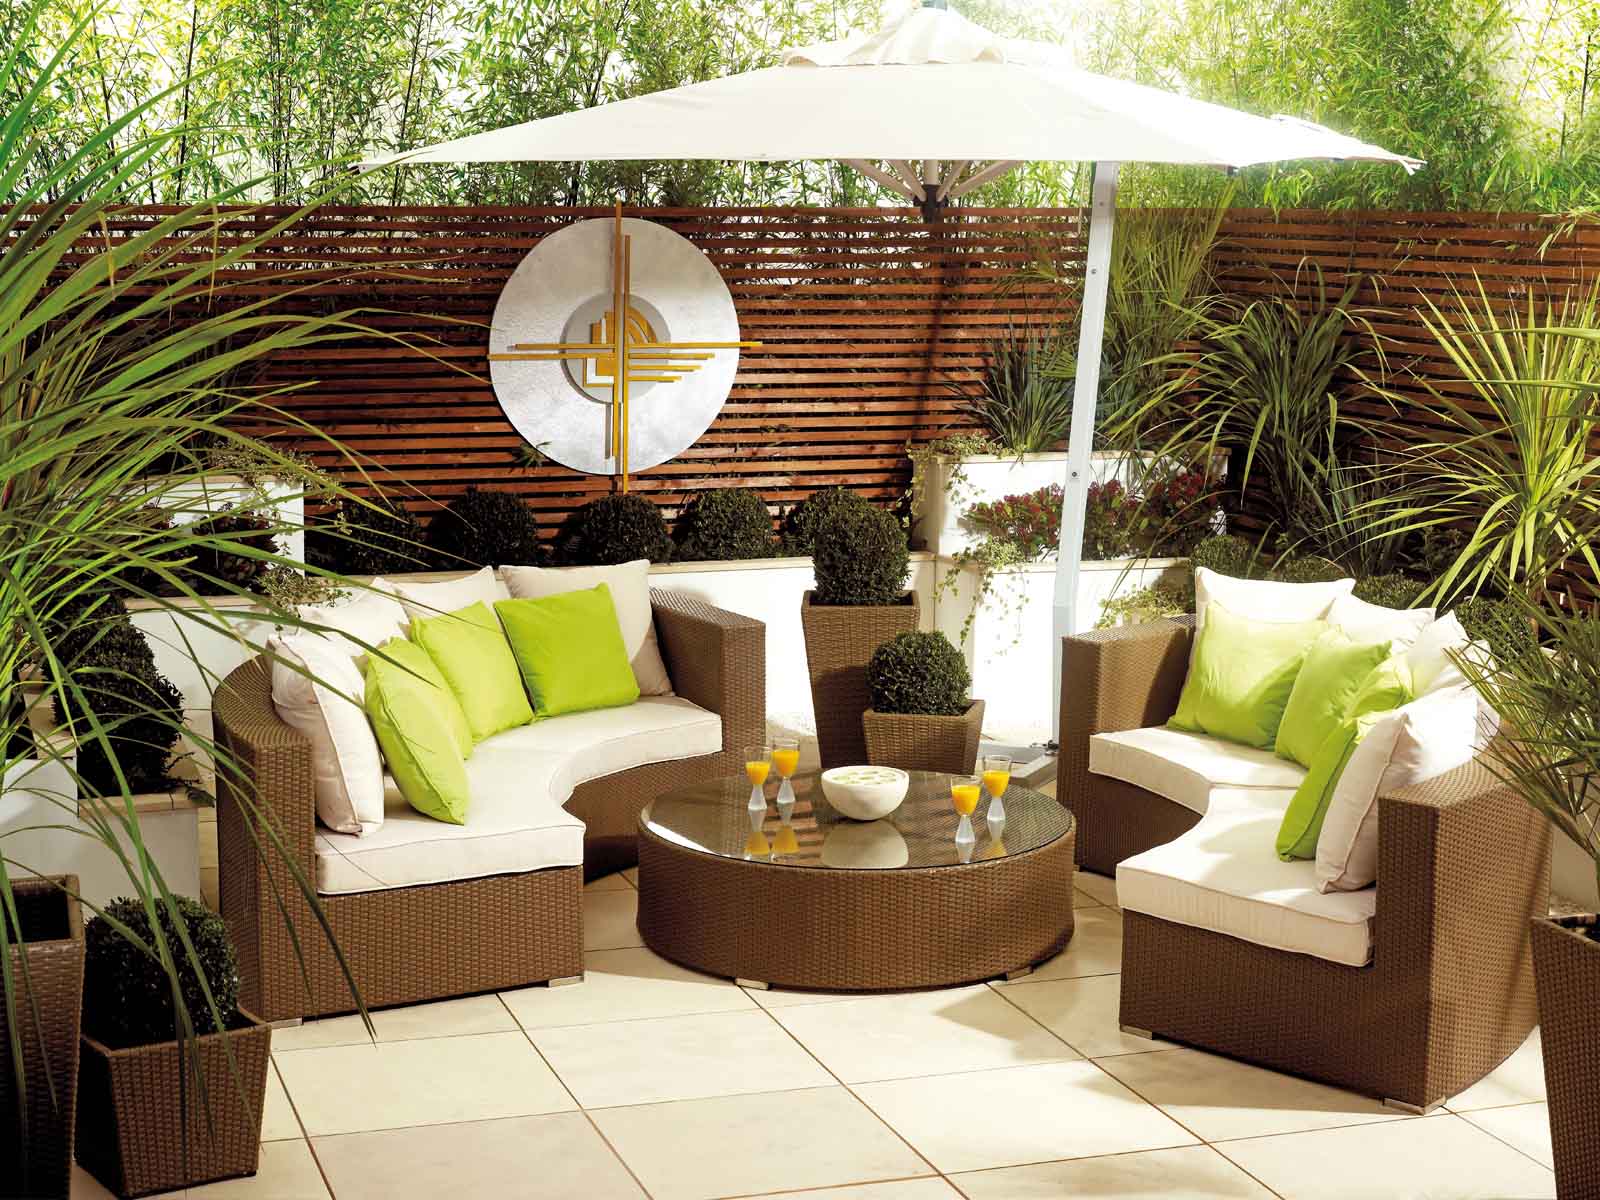 Outdoor Furniture Wicker Contemporary Outdoor Furniture Design With Wicker Furniture Completed With Green Sofa Pillows And White Patio Umbrella Furniture Contemporary Outdoor Furniture As A Companion To Nature